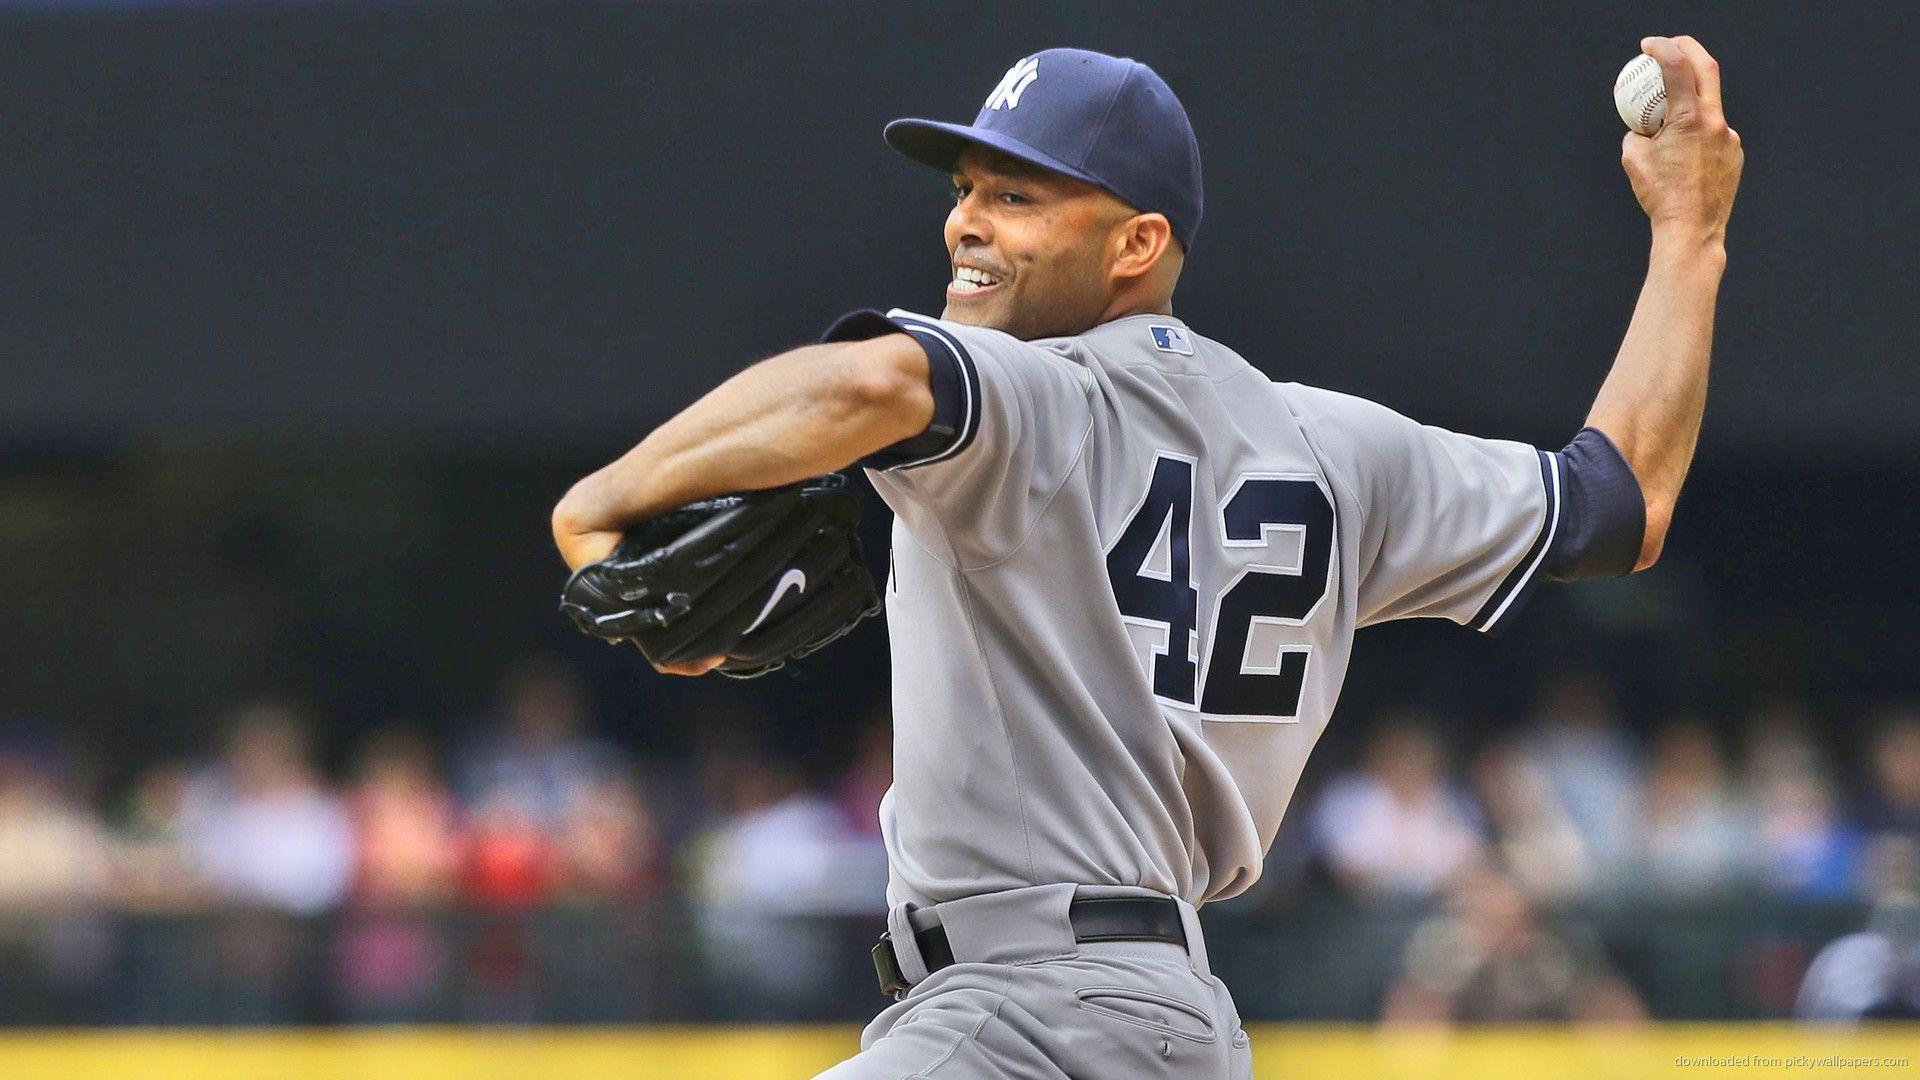 Mariano Rivera Throws One Picture For iPhone, Blackberry, iPad